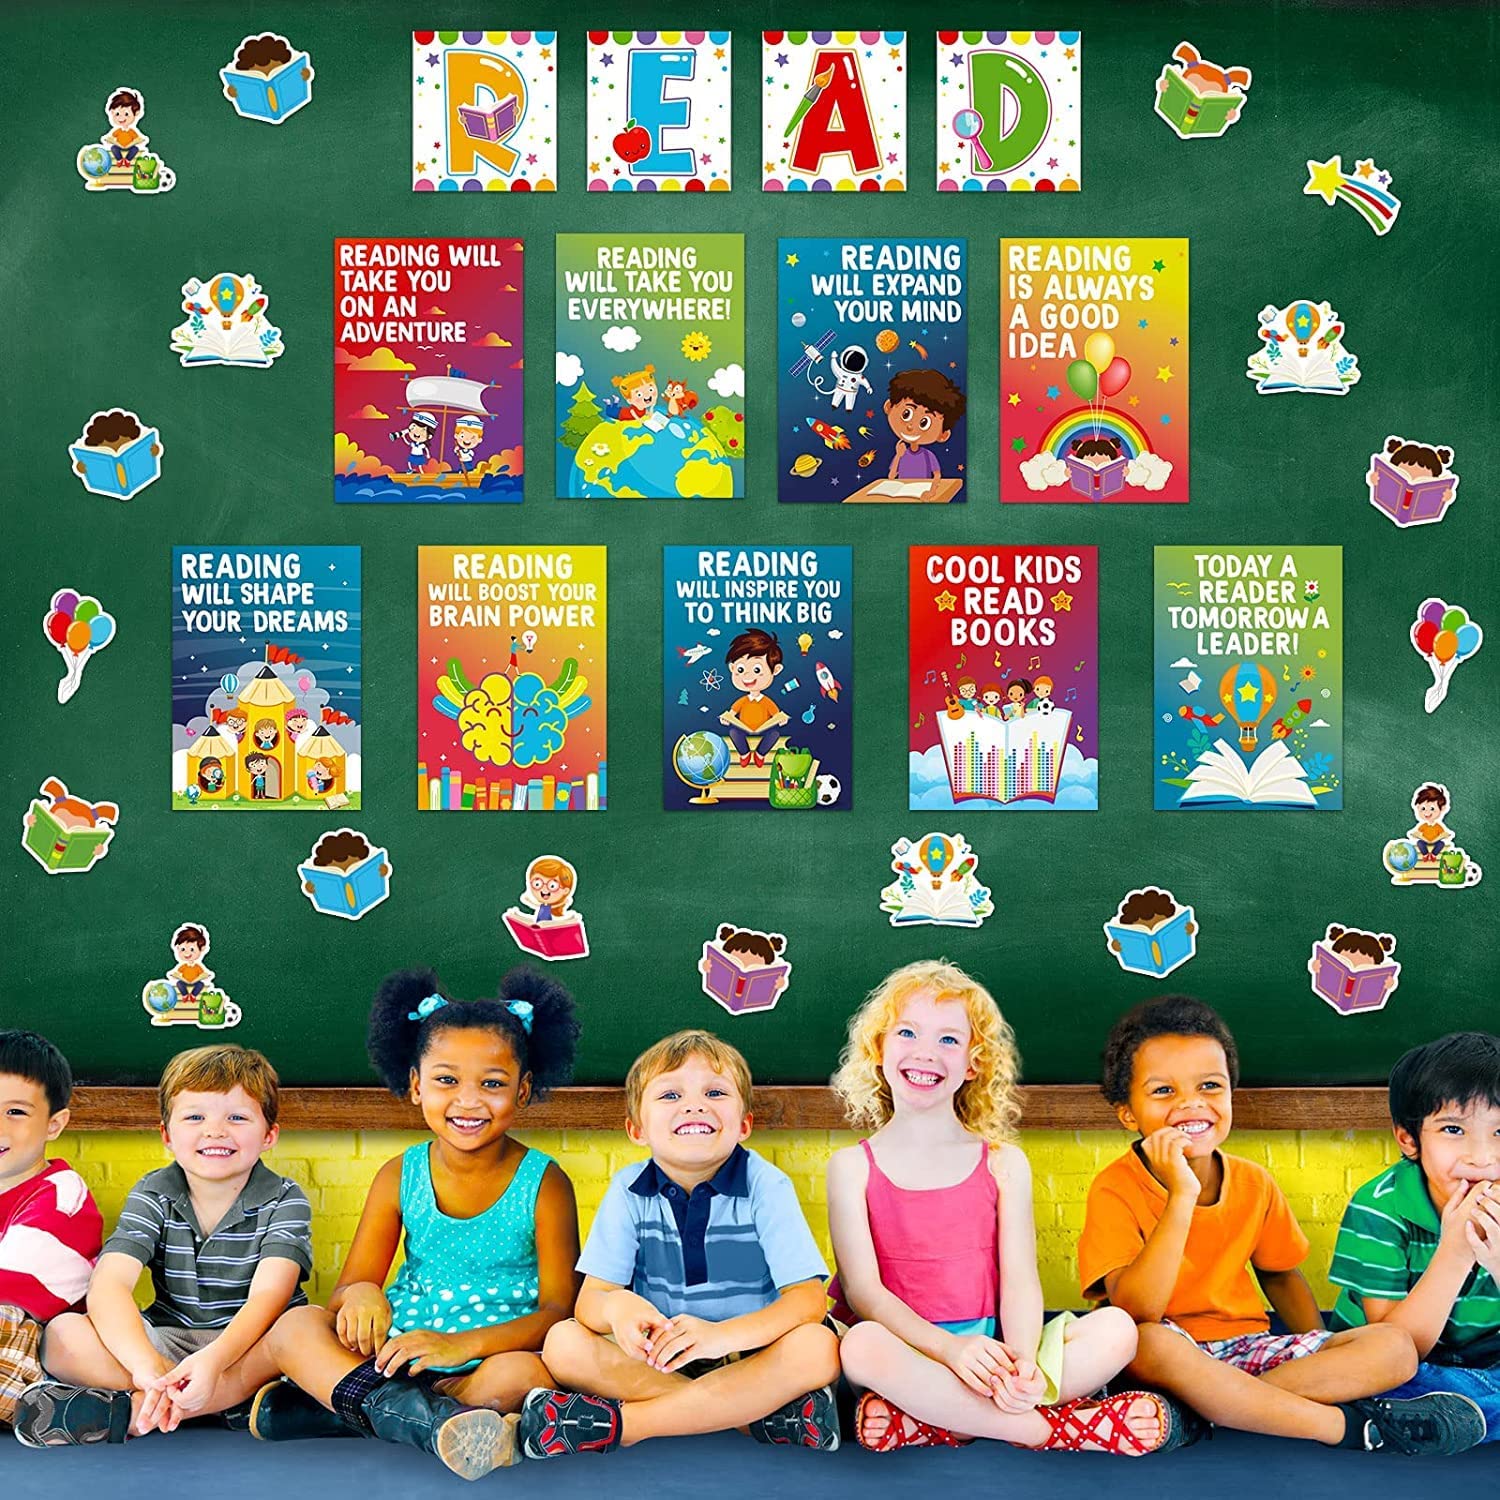 A set of posters with educational prints about reading